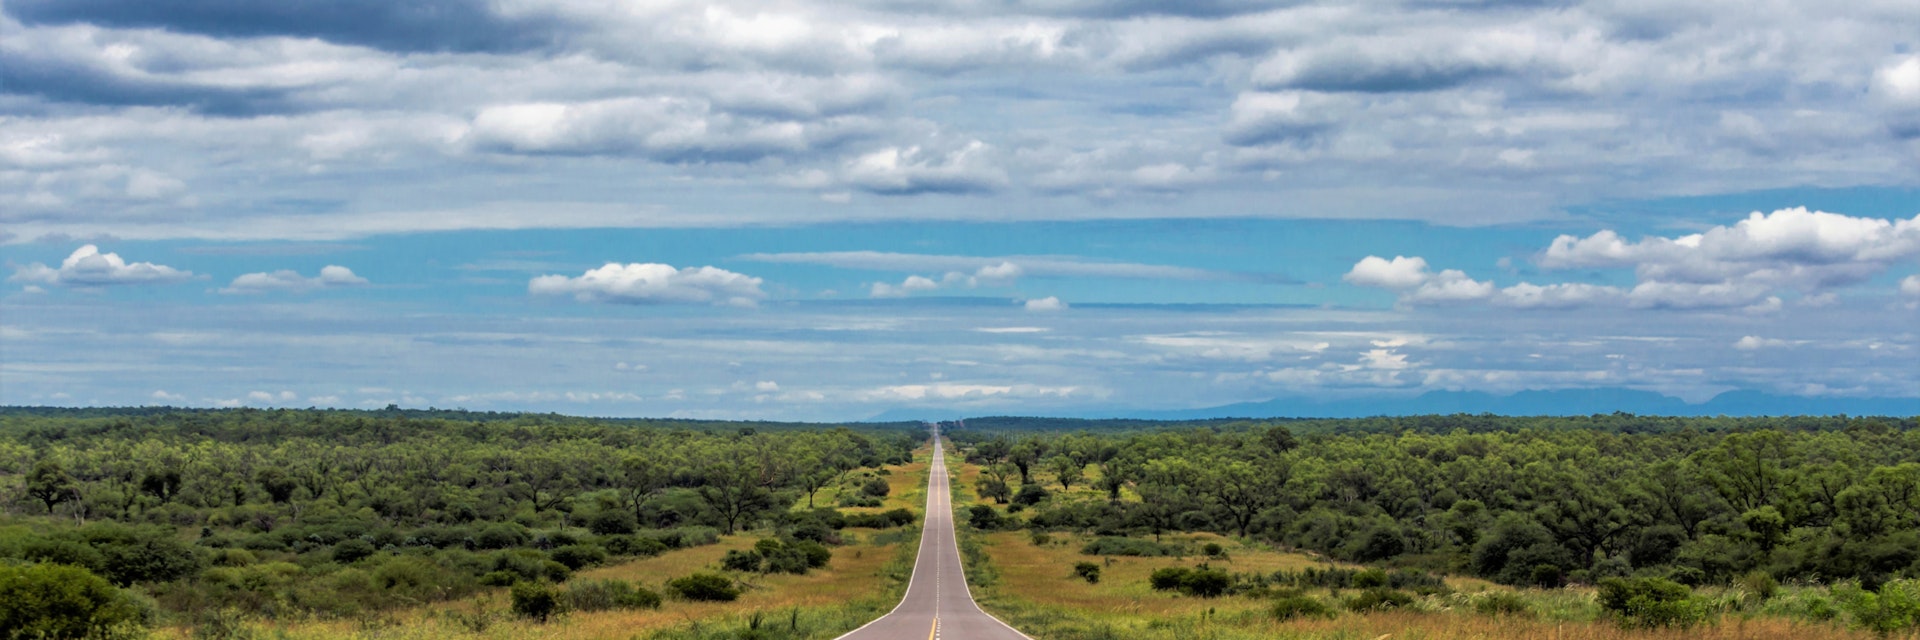 Highway that crosses the province of Chaco, Argentina.